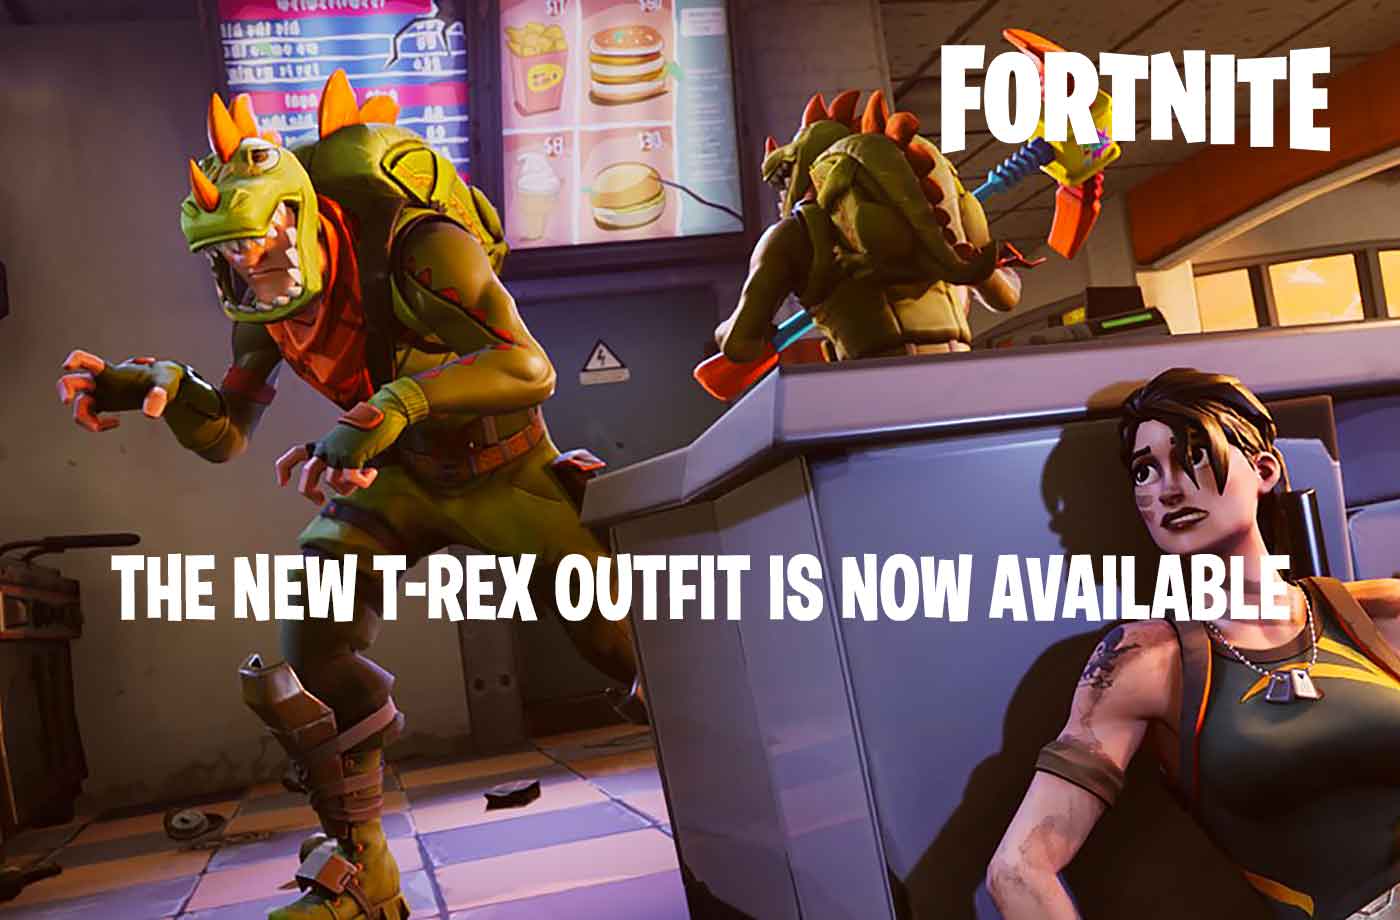 fortnite battle royale the new t rex outfit is now available how to unlock the skin - ninja outfit fortnite